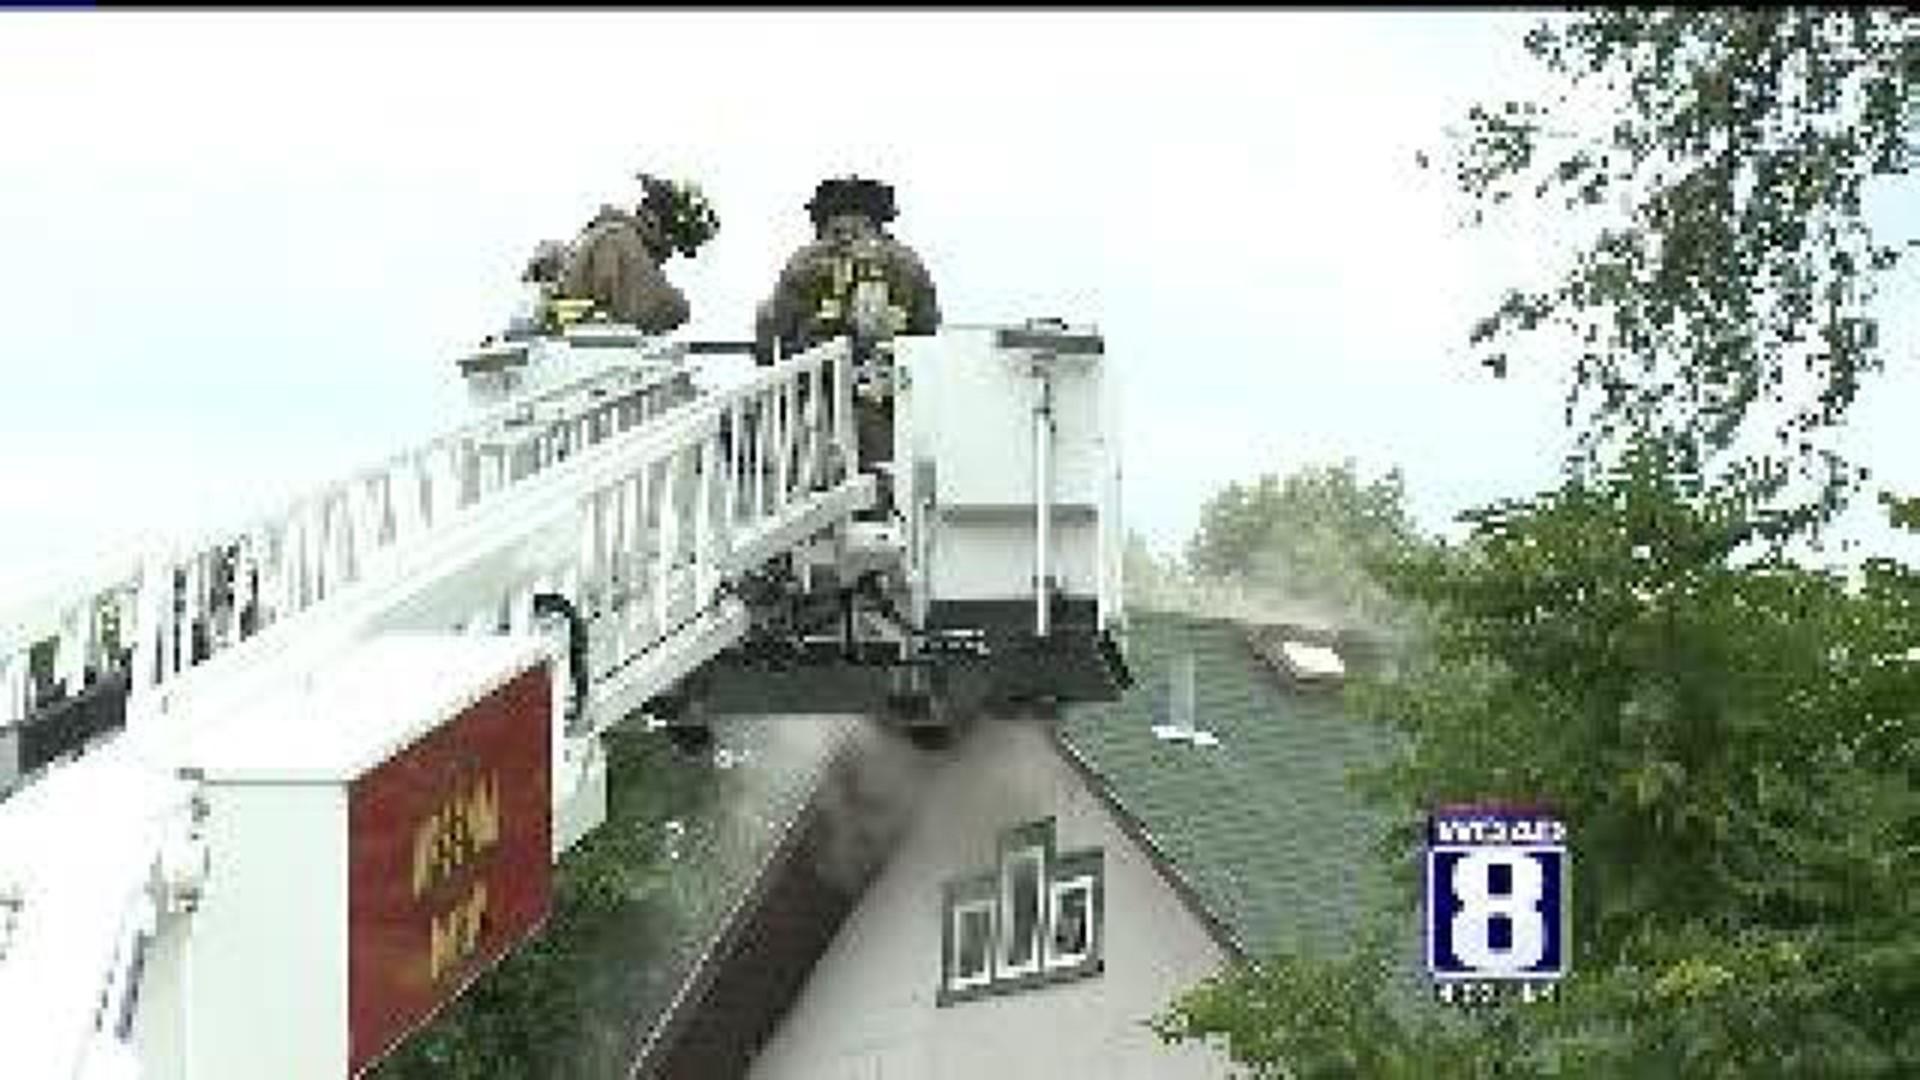 Fire at Moline home causes "major damage"